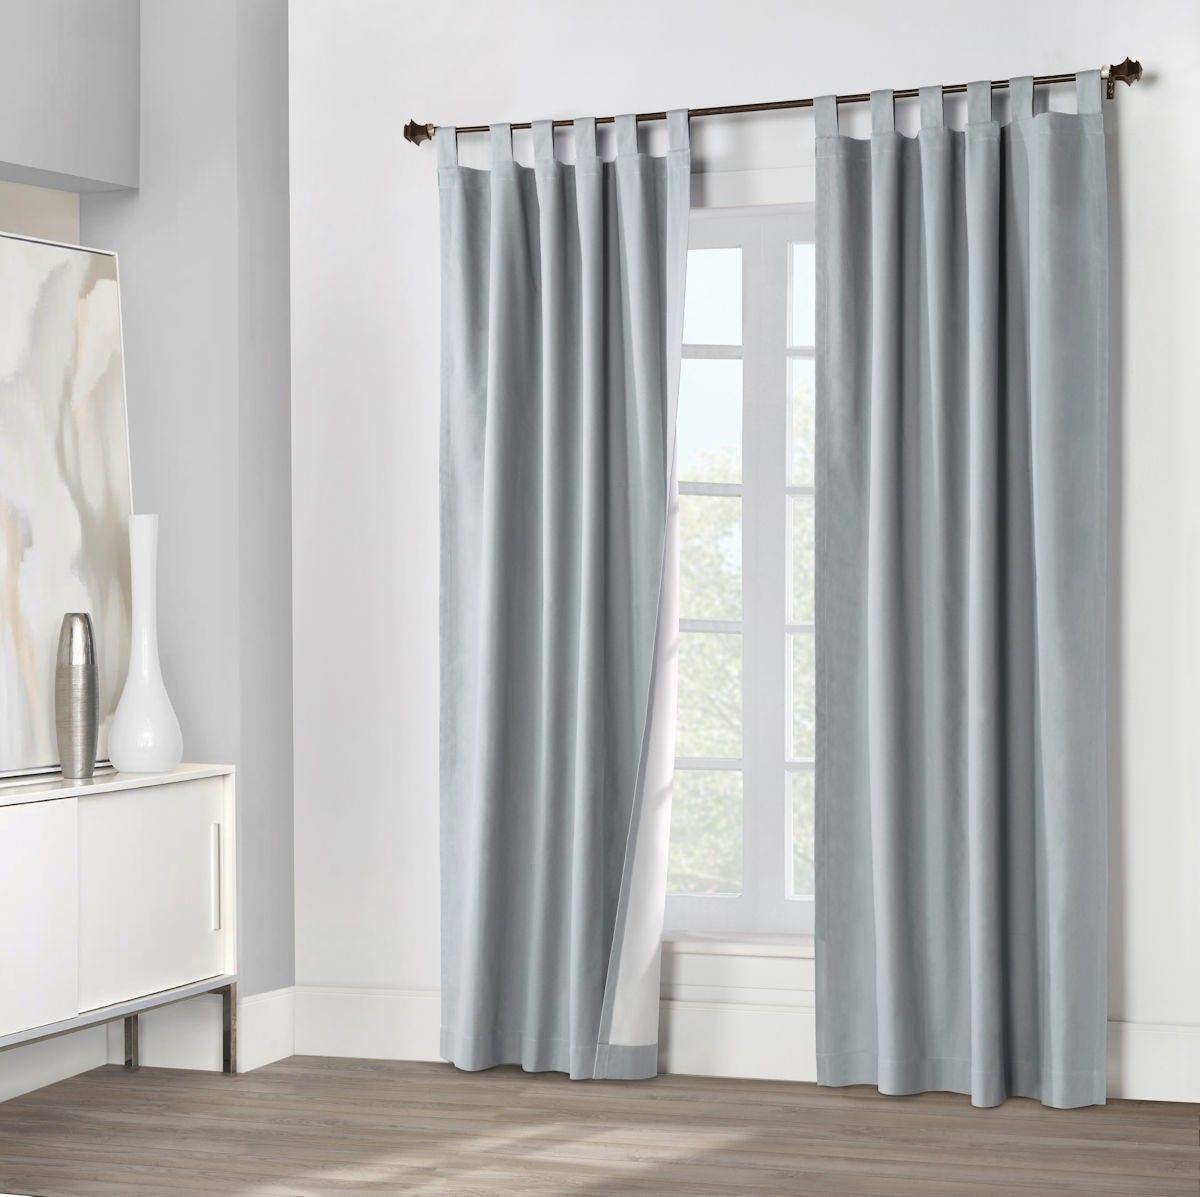 Insulated curtains keep your home warmer